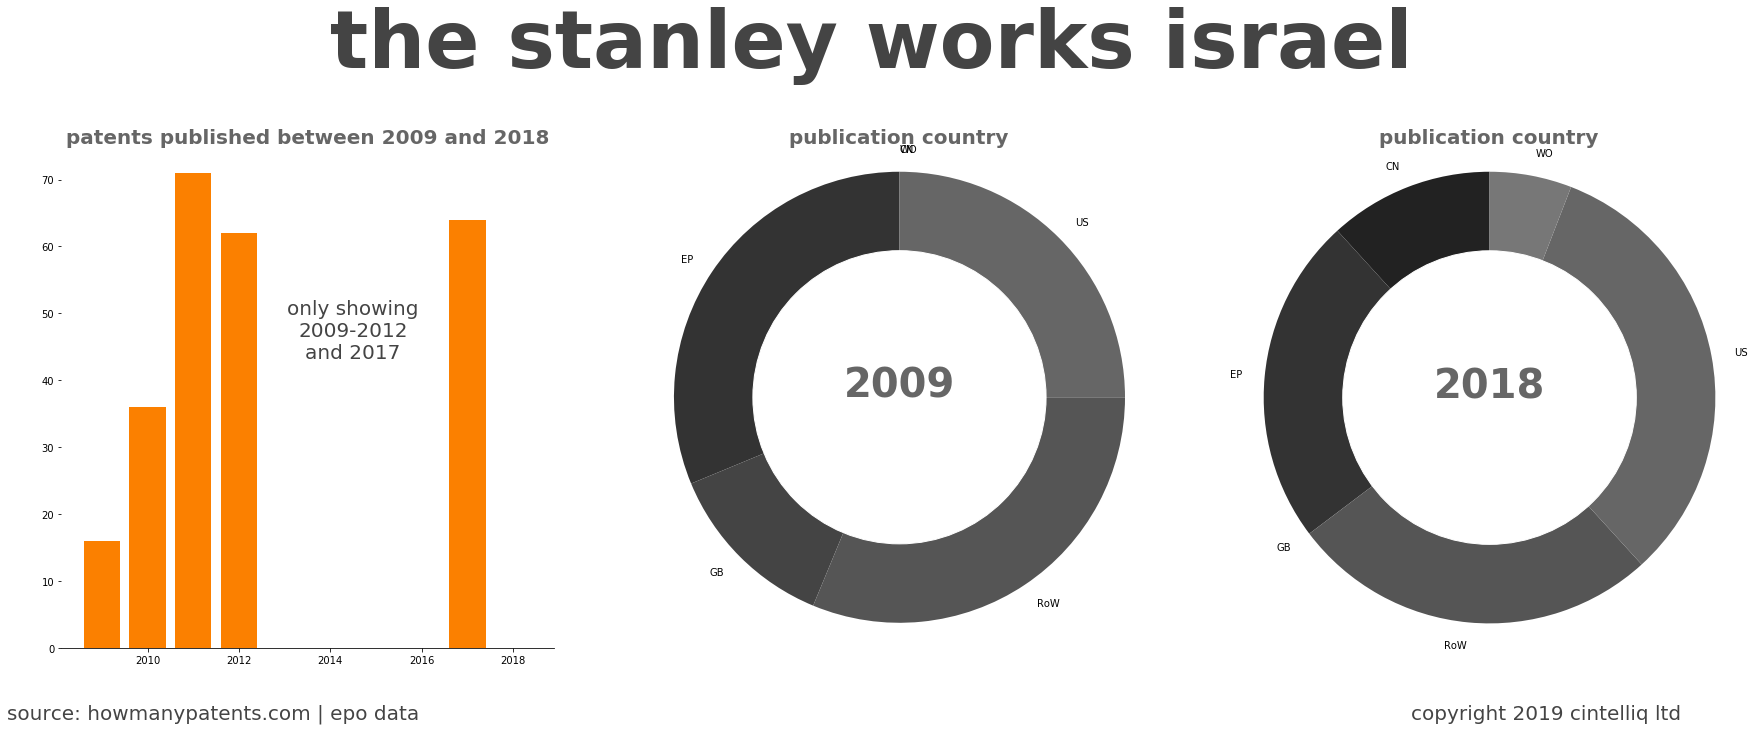 summary of patents for The Stanley Works Israel